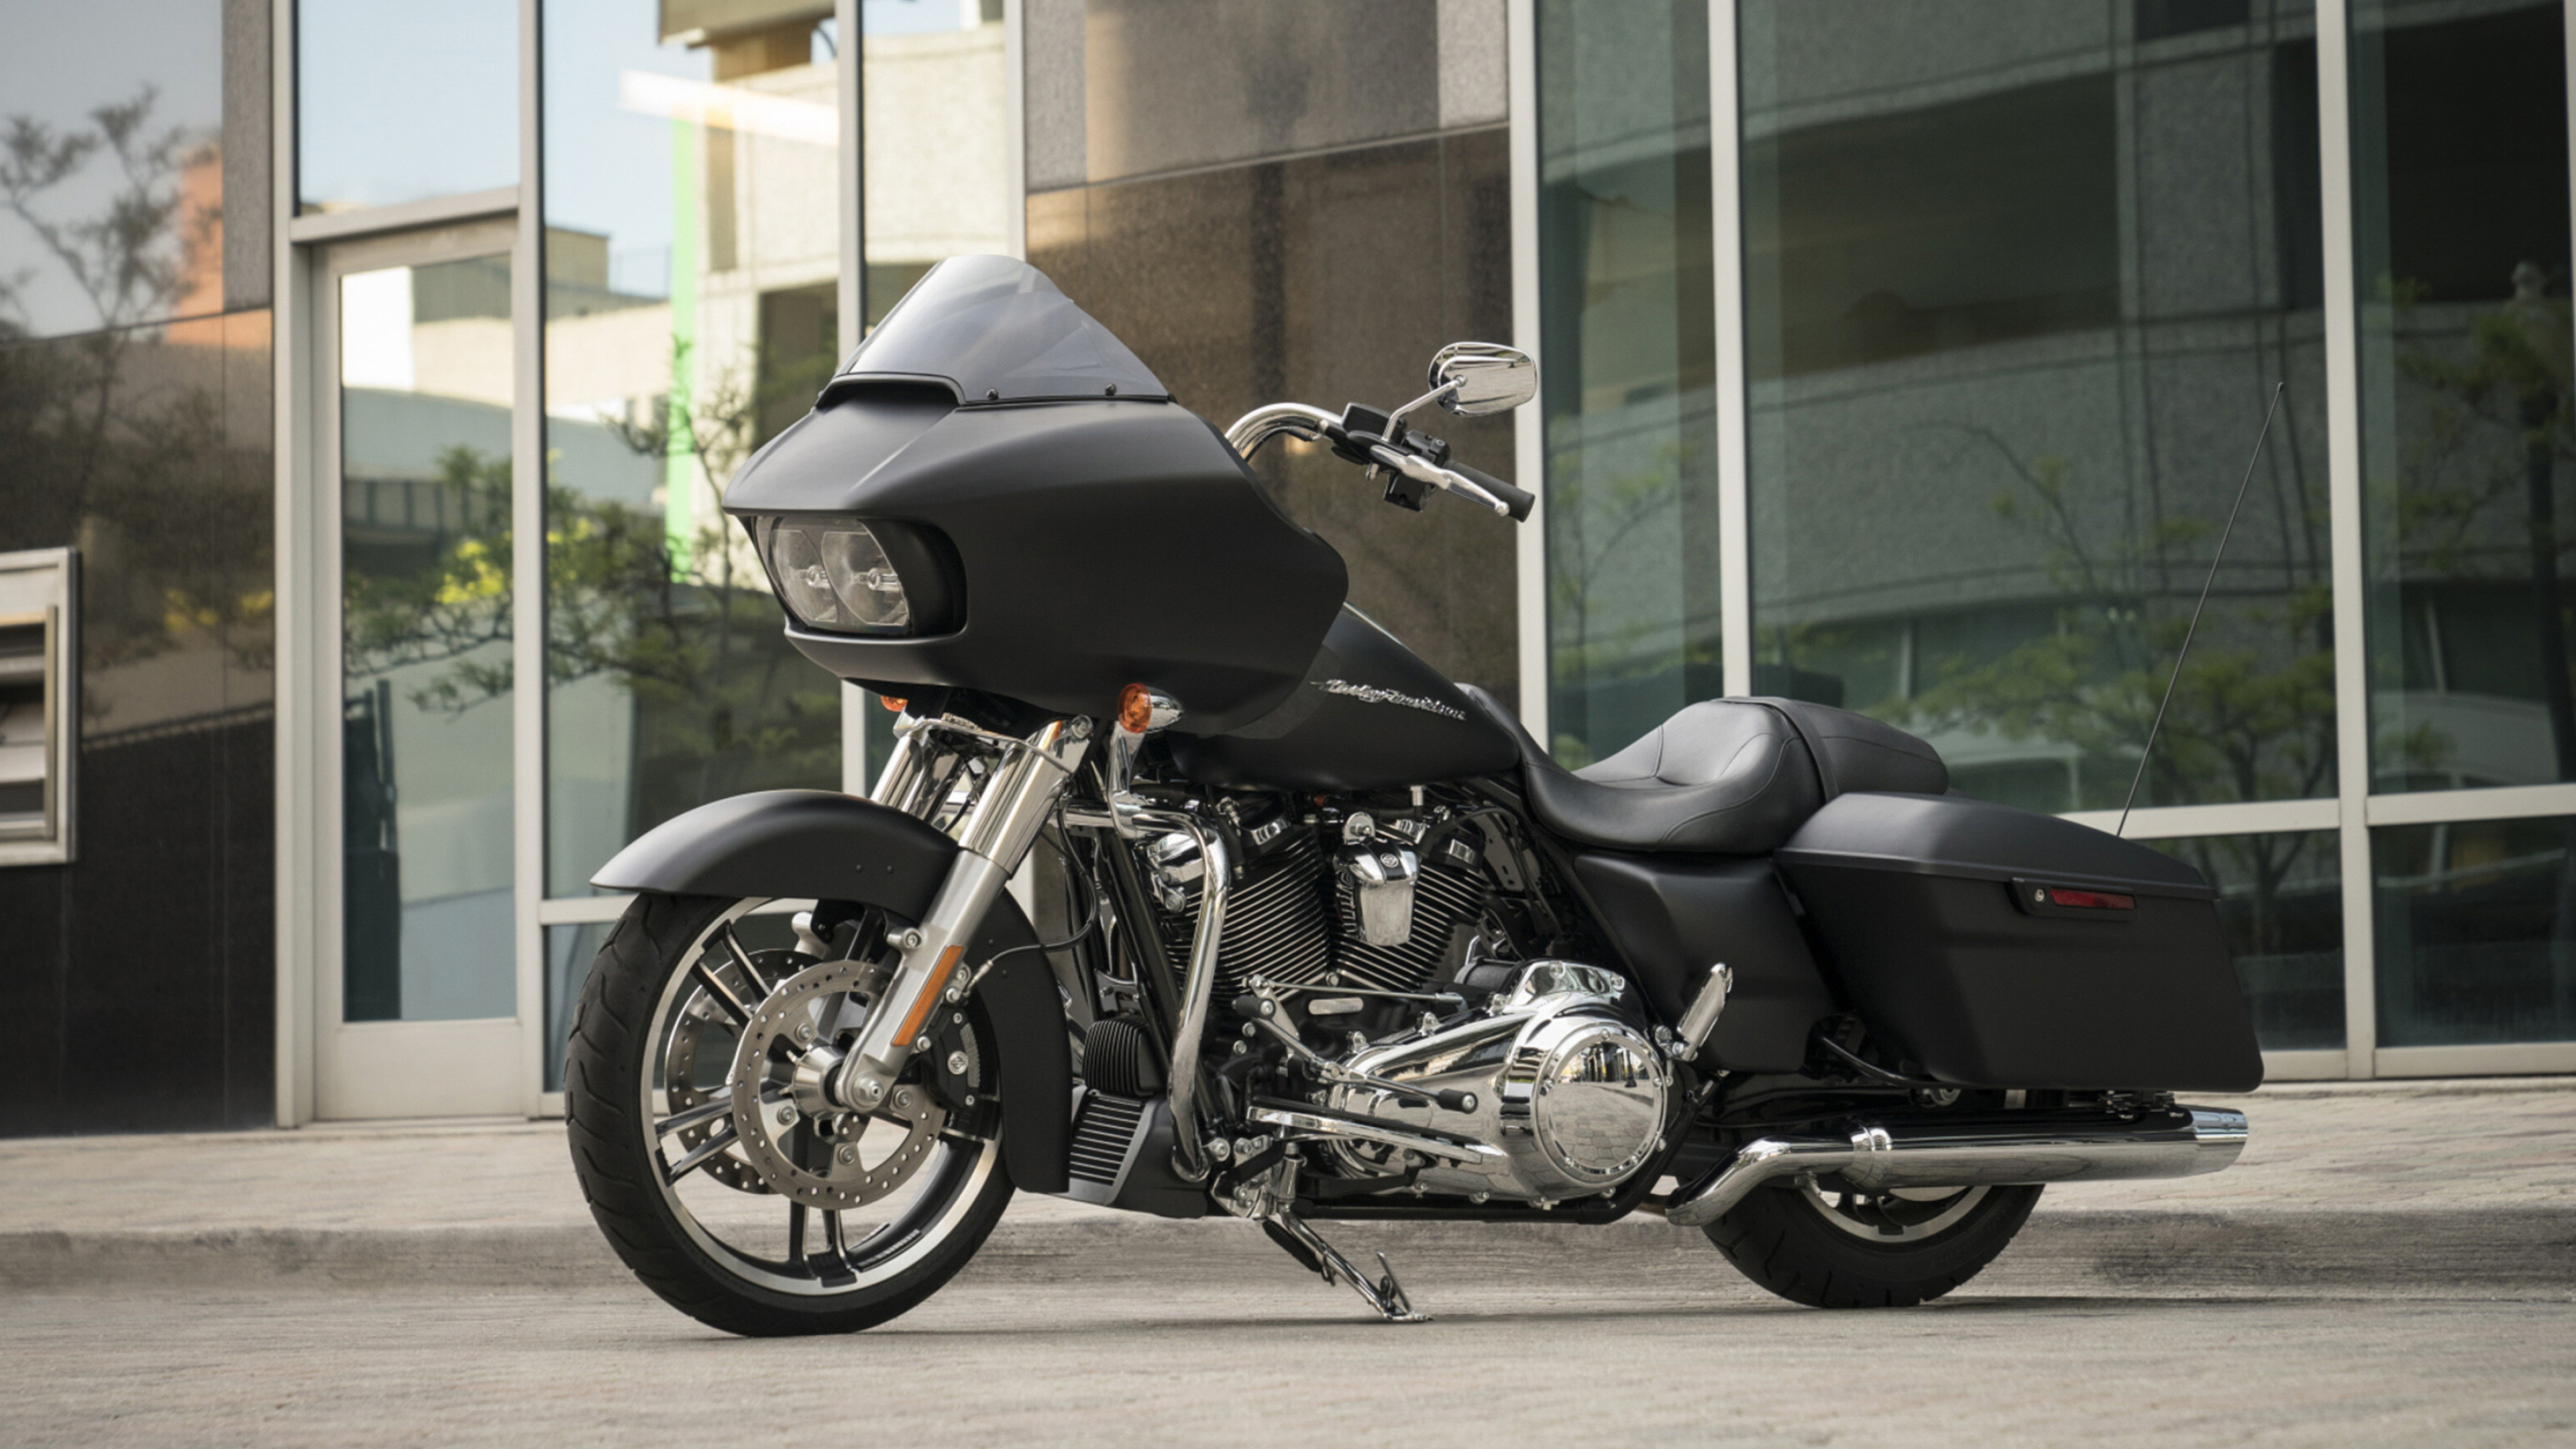 Harley-Davidson Glide: American motorcycles, Founded in 1903, Bikes. 3840x2160 4K Wallpaper.